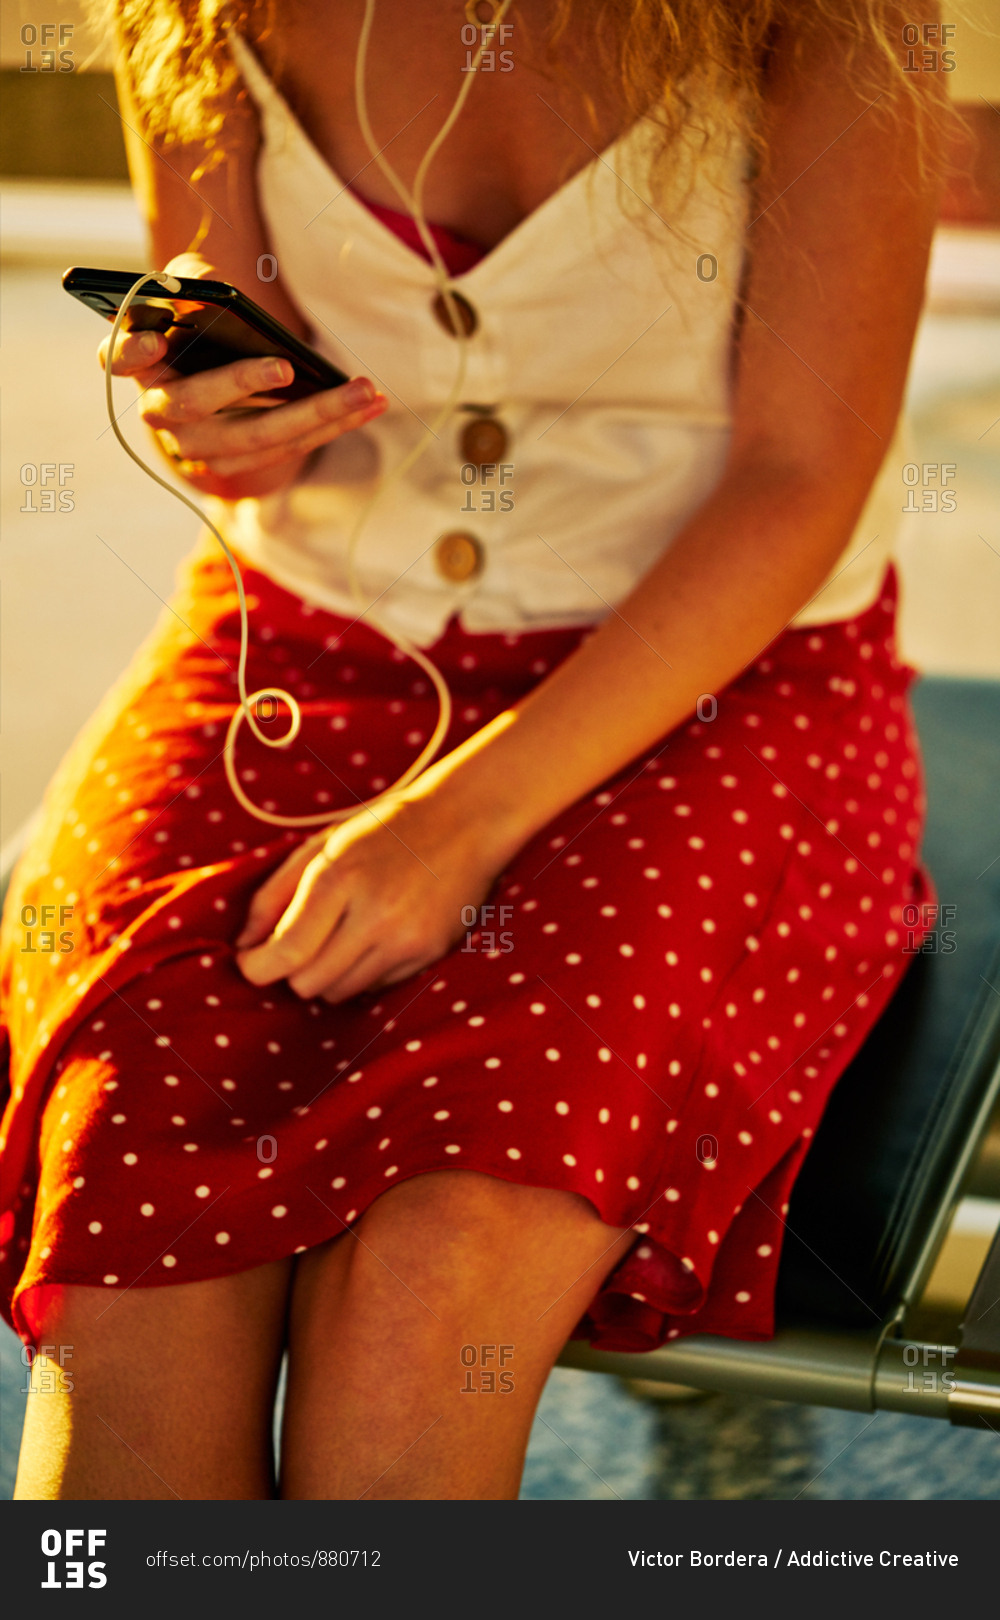 crop woman in earphones listening to music with mobile phone while chilling on metal bench in airport of Texas